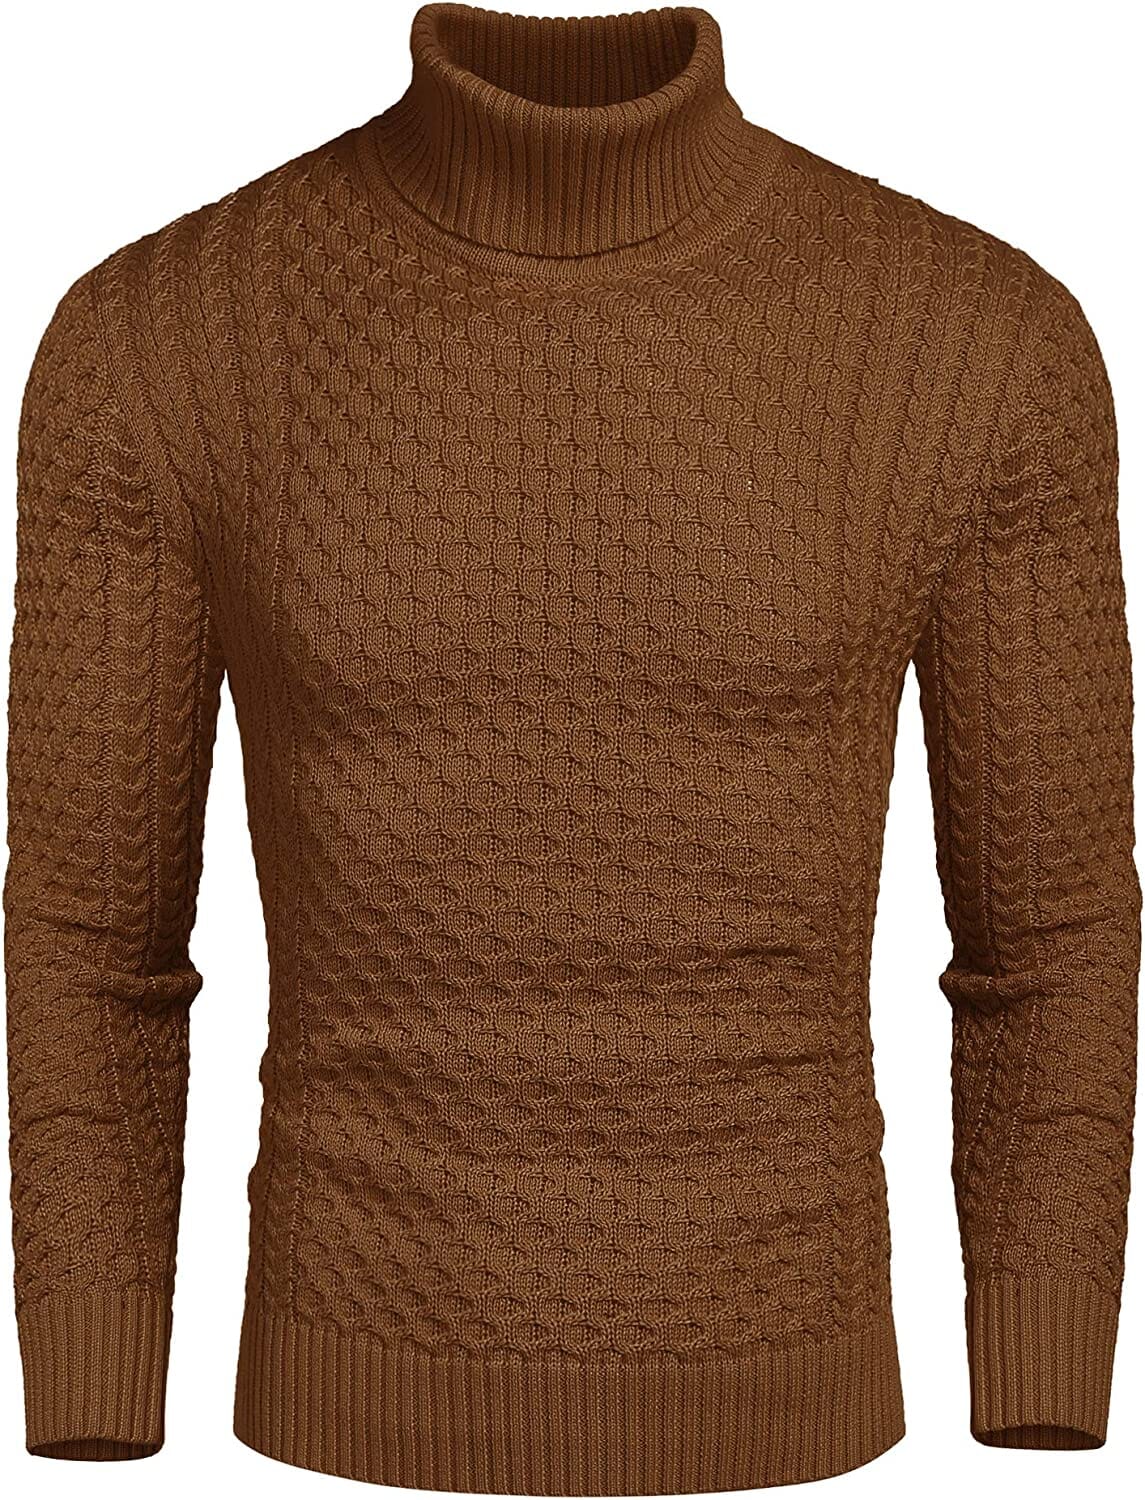 Slim Fit Turtleneck Knitted Twisted Pullover Sweaters (US Only) Sweaters Coofandy's Dark Brown S 